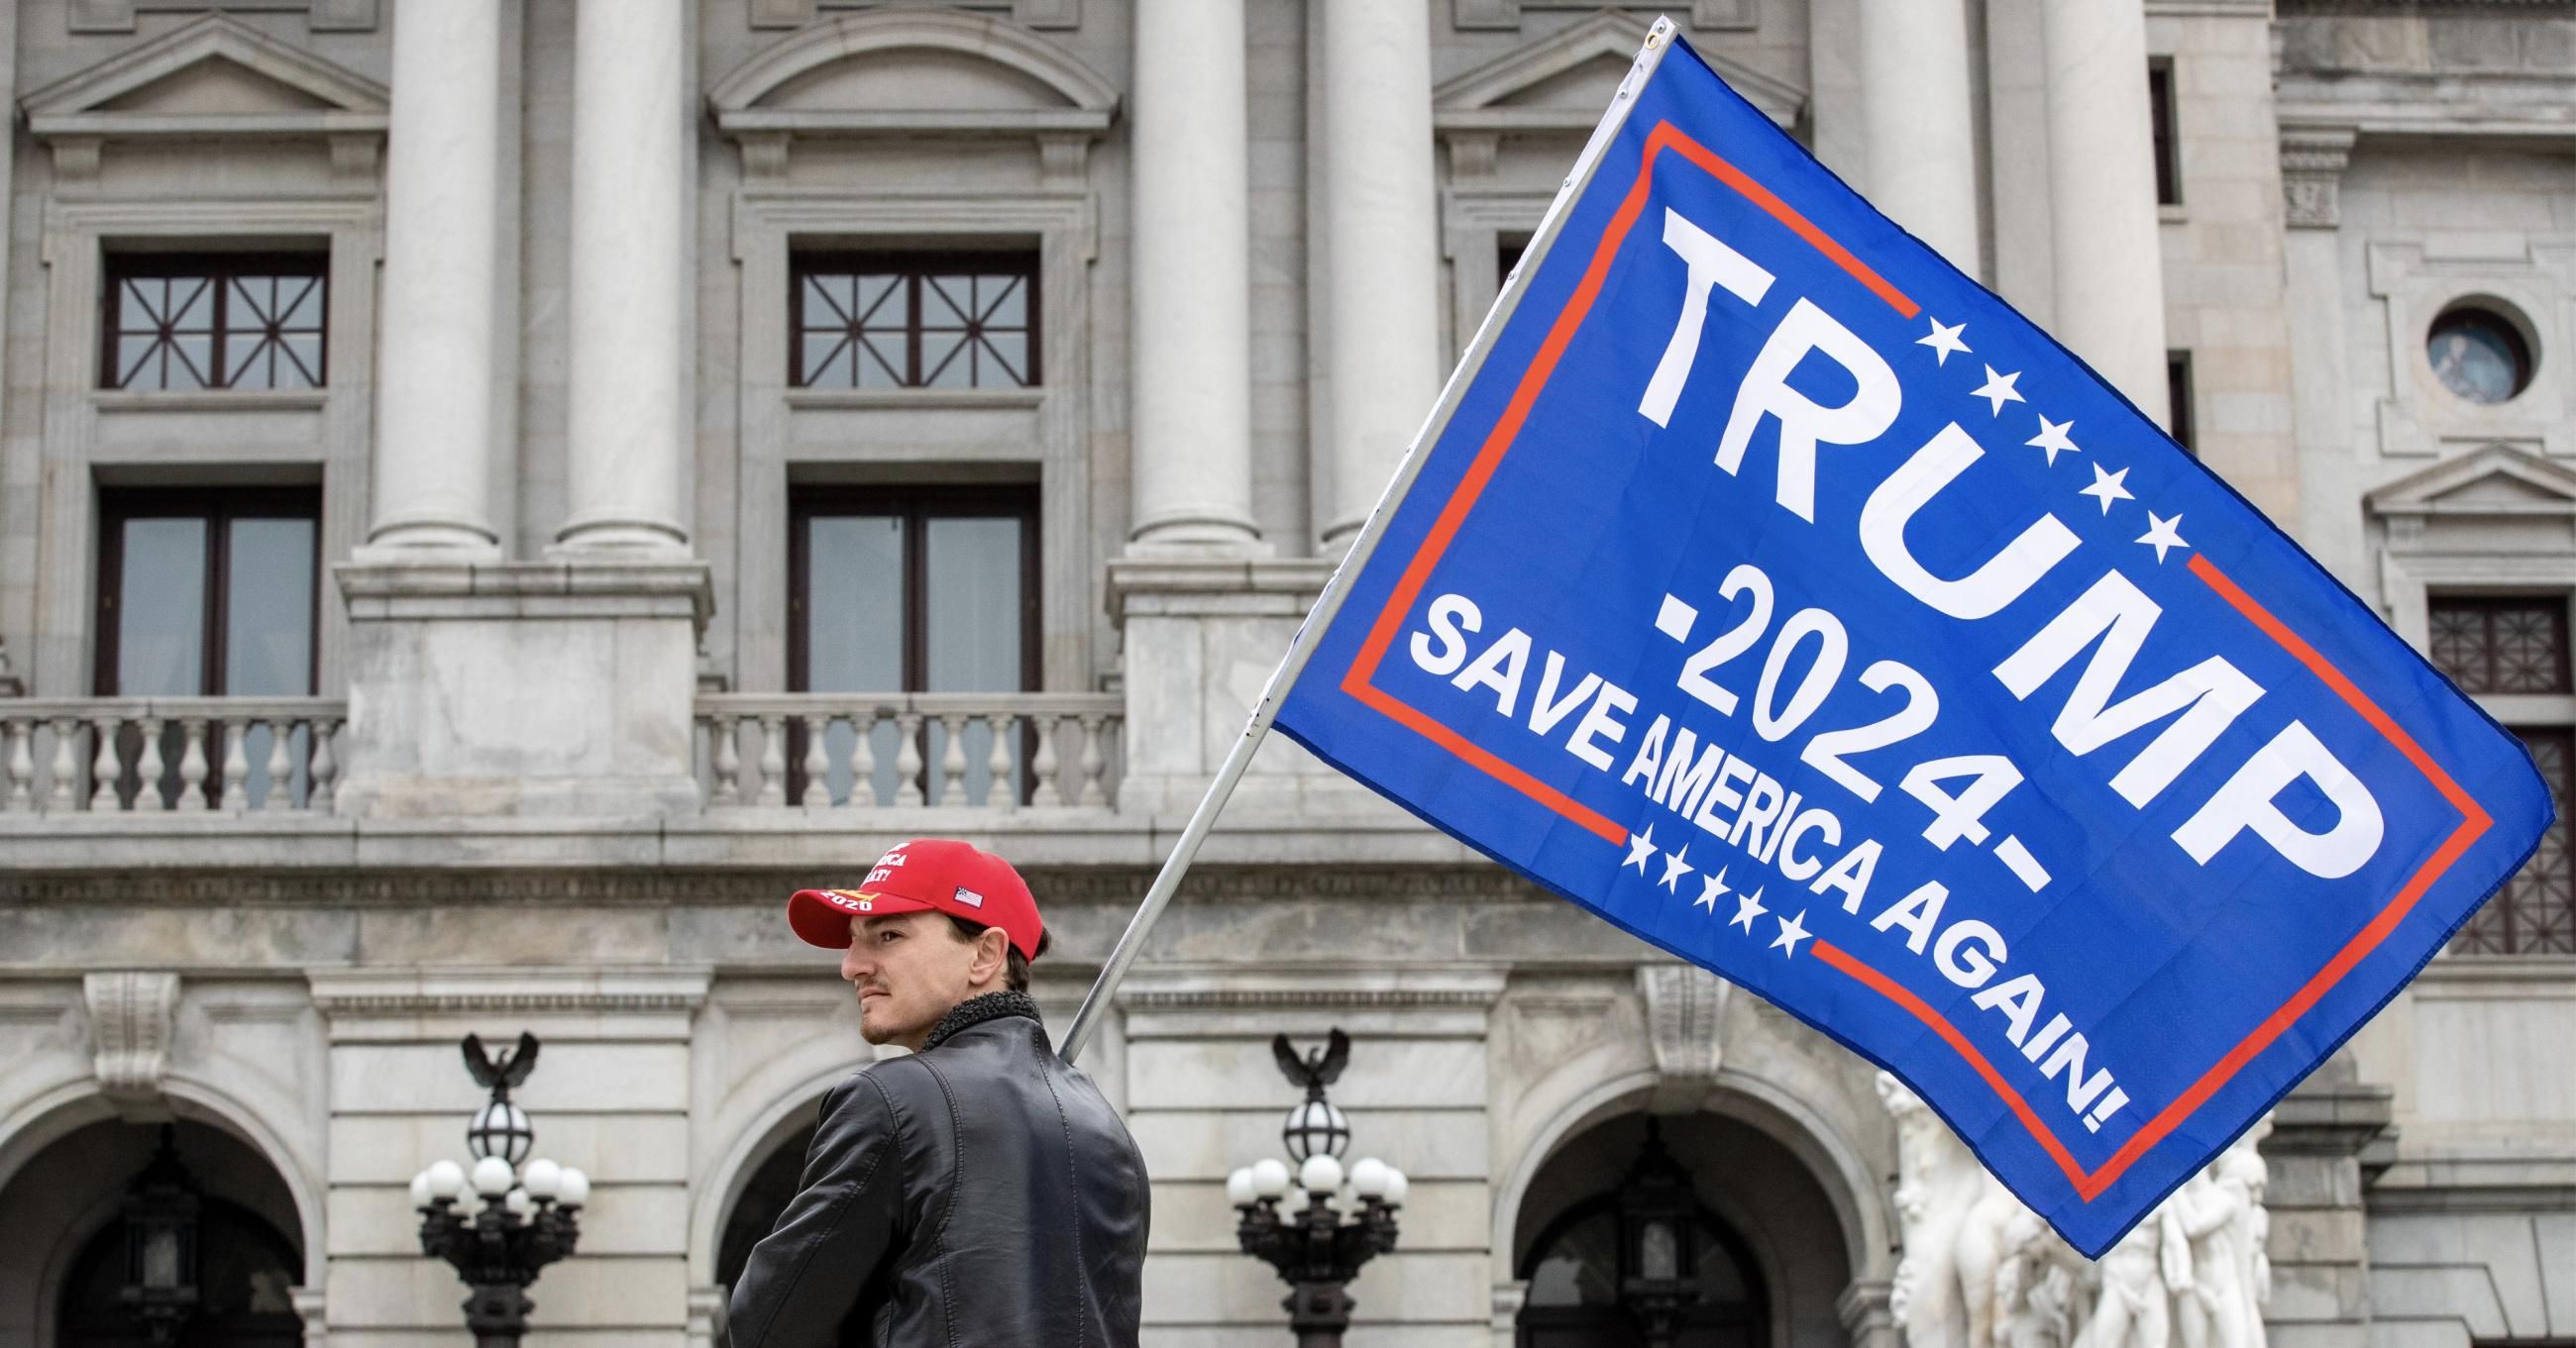 A protester holds a Trump 2024 flag in front of the Pennsylvania State Capitol on February 27, 2021. (Photo: Paul Weaver/SOPA Images/LightRocket via Getty Images)